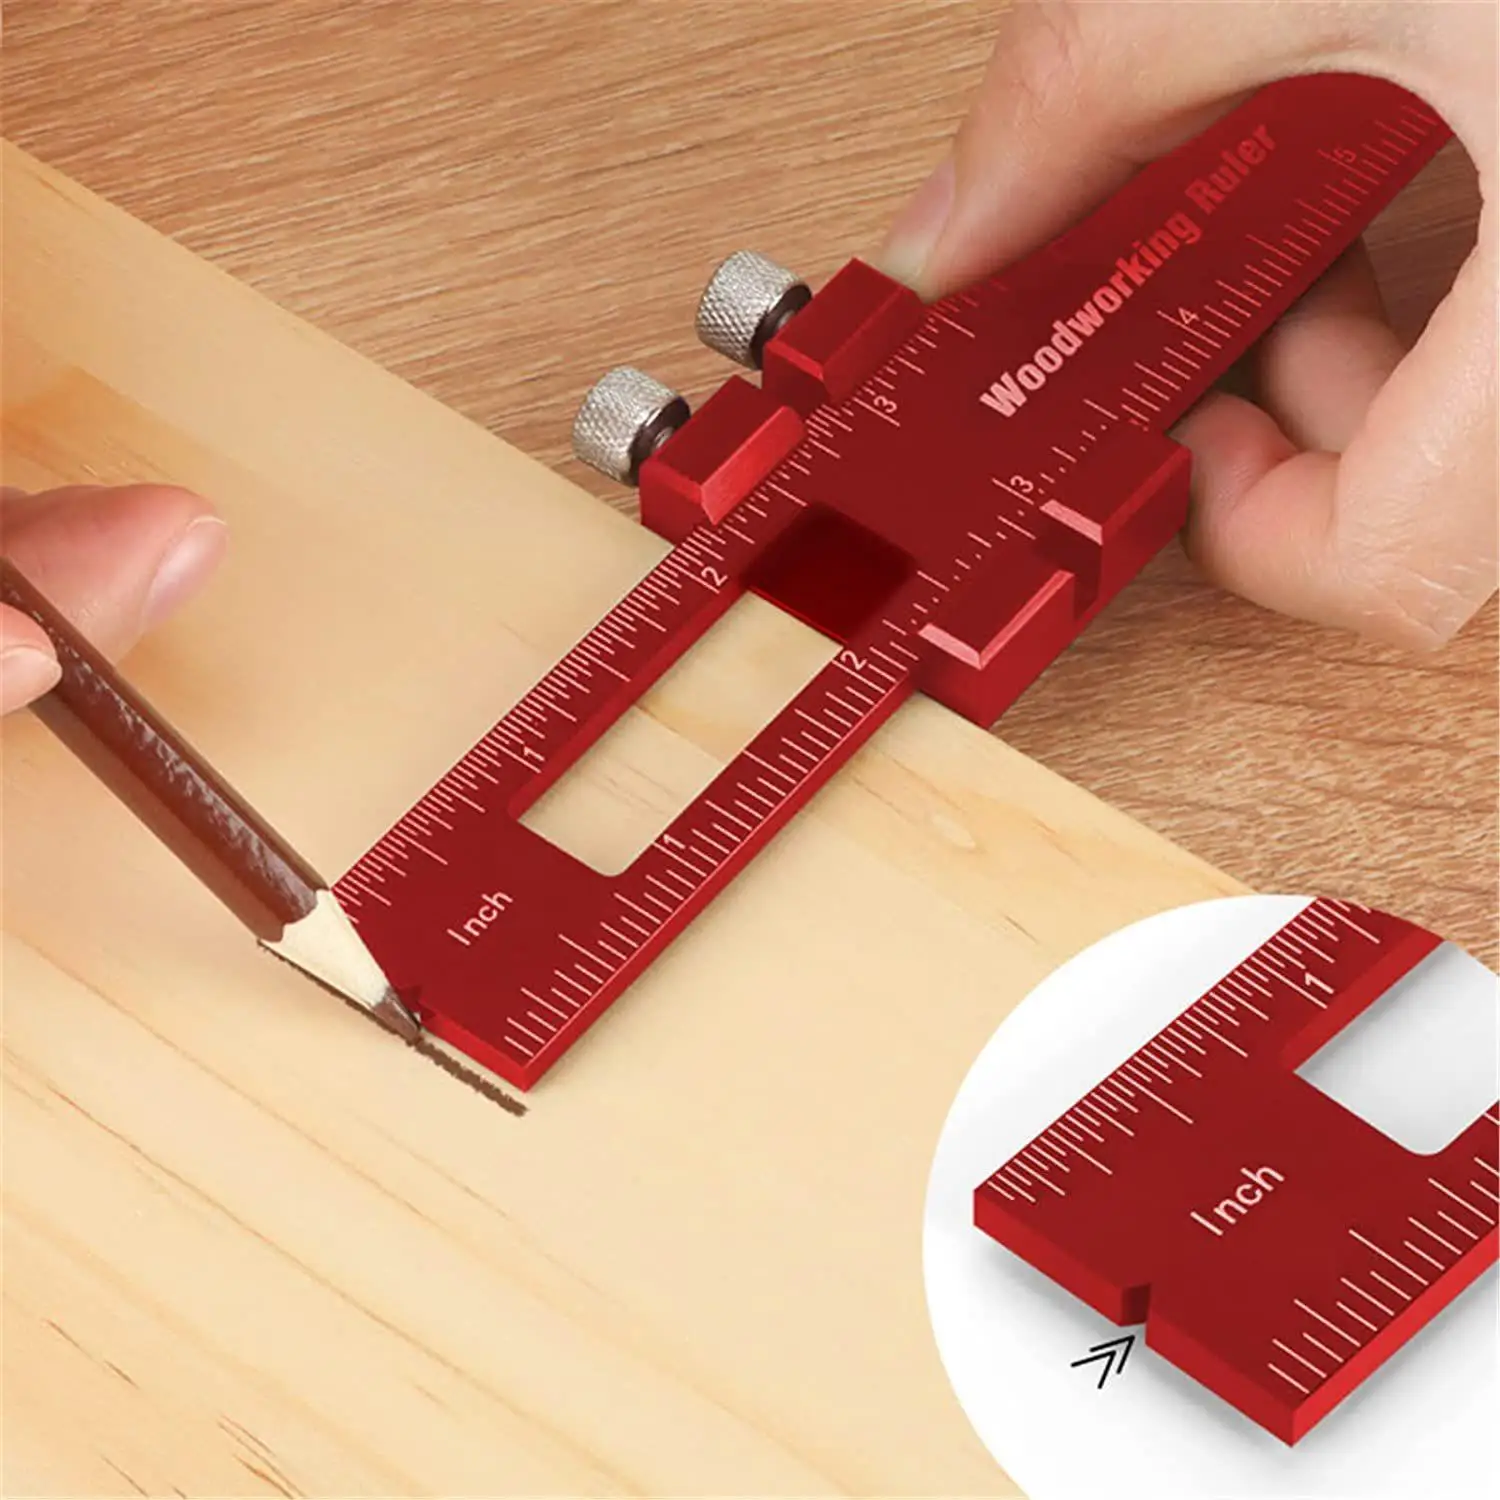 

Woodworking Tools Ruler Scriber Positioning Scribing Gauge Ruler Measuring Tool with Metric and Imperial Scales Carpenter Tools